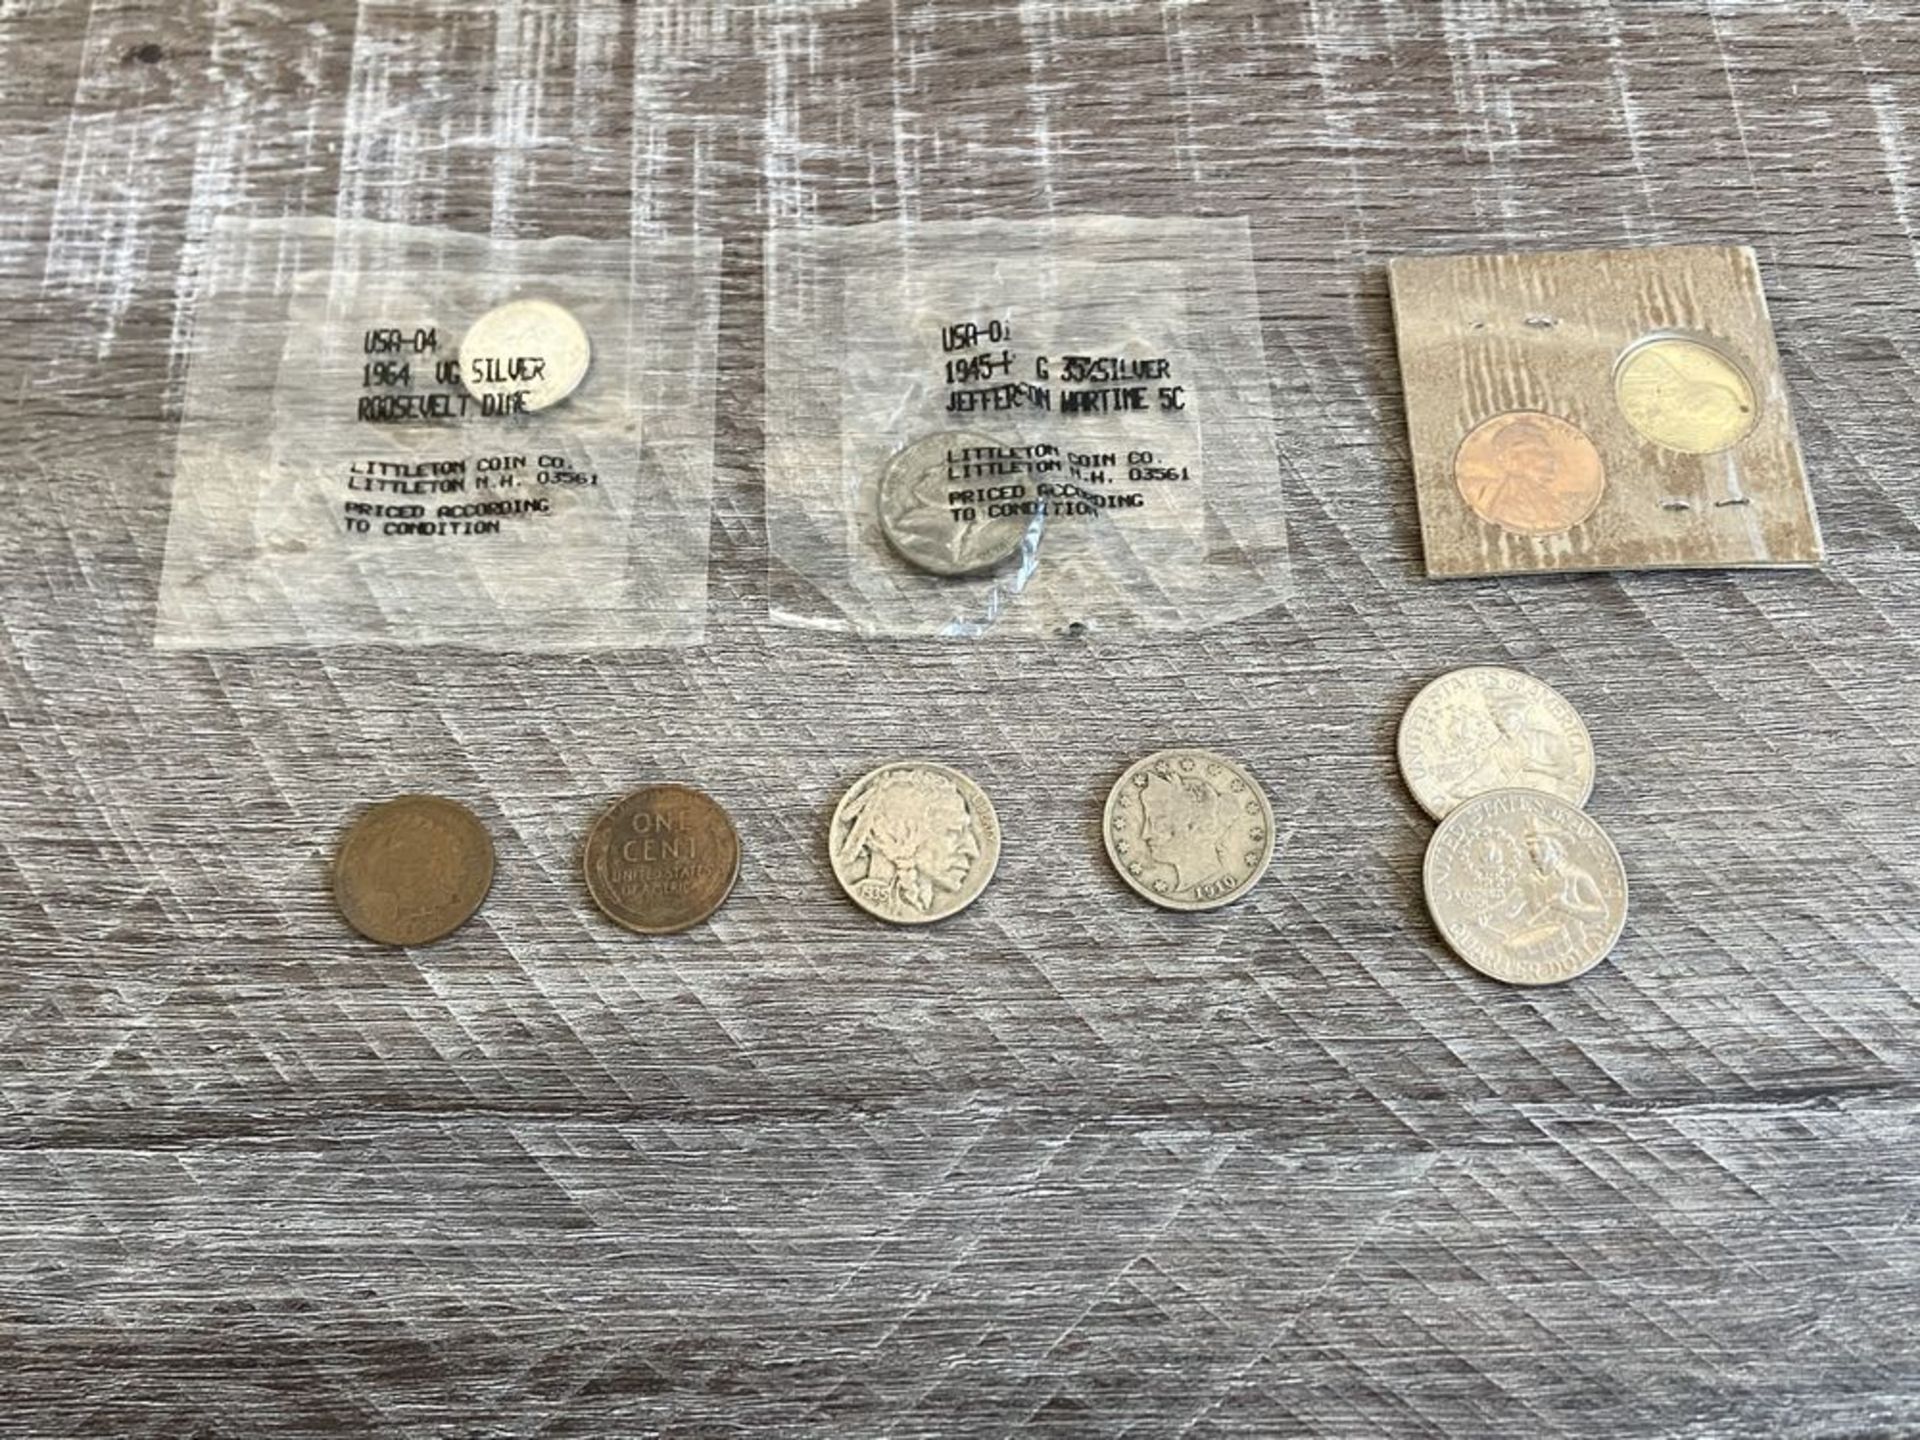 Collection of Old American Coins: Buffalo Nickle, Roosevelt Dime, Wheat Penny, Etc